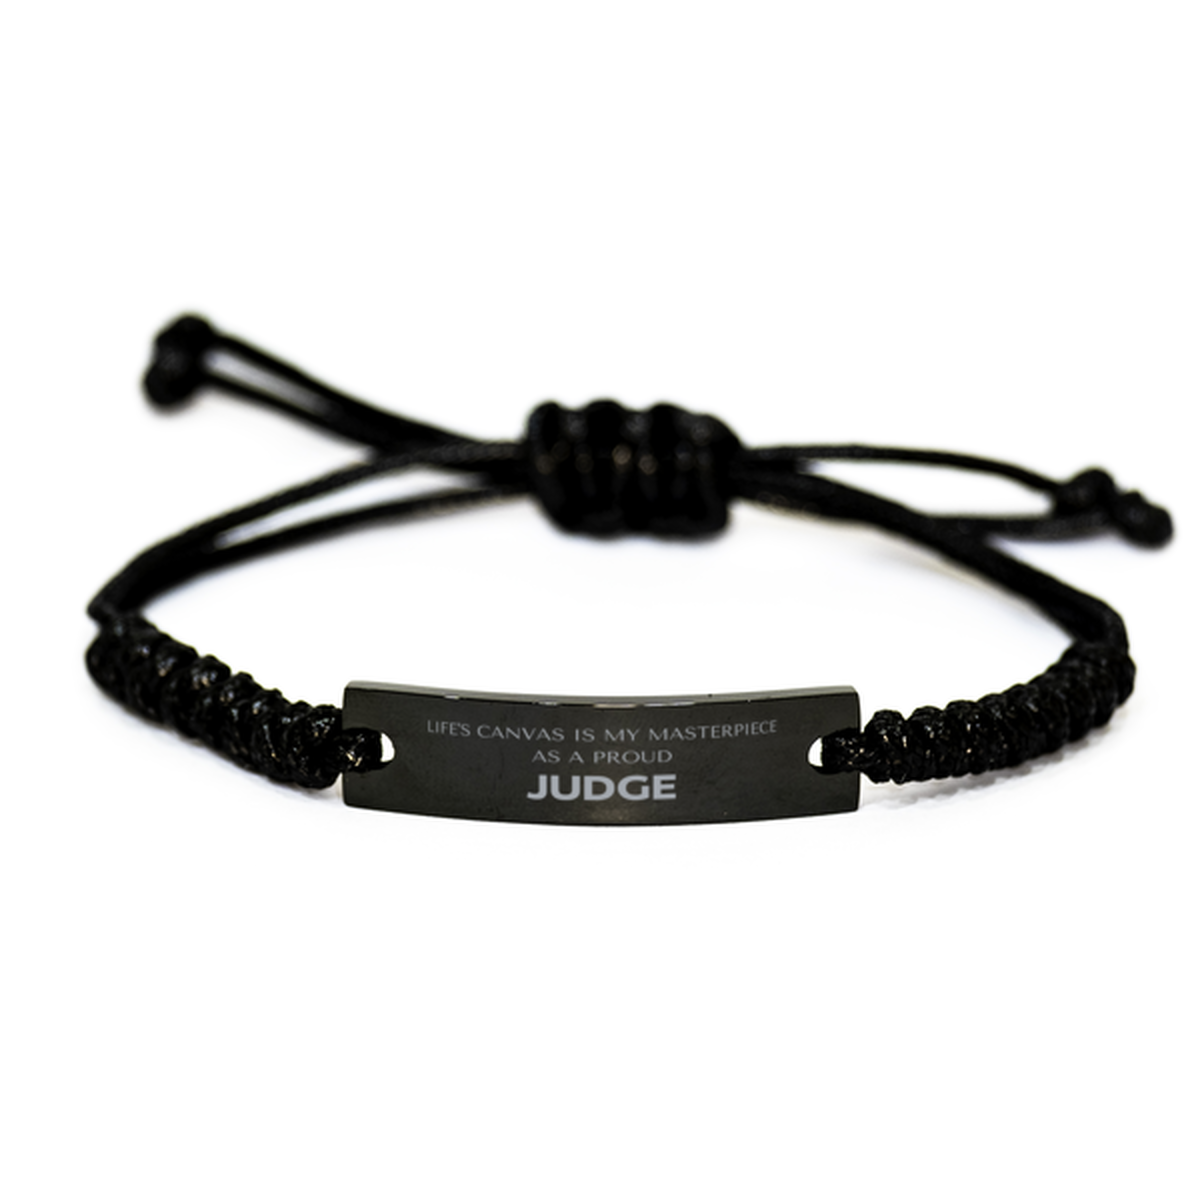 Proud Judge Gifts, Life's canvas is my masterpiece, Epic Birthday Christmas Unique Black Rope Bracelet For Judge, Coworkers, Men, Women, Friends